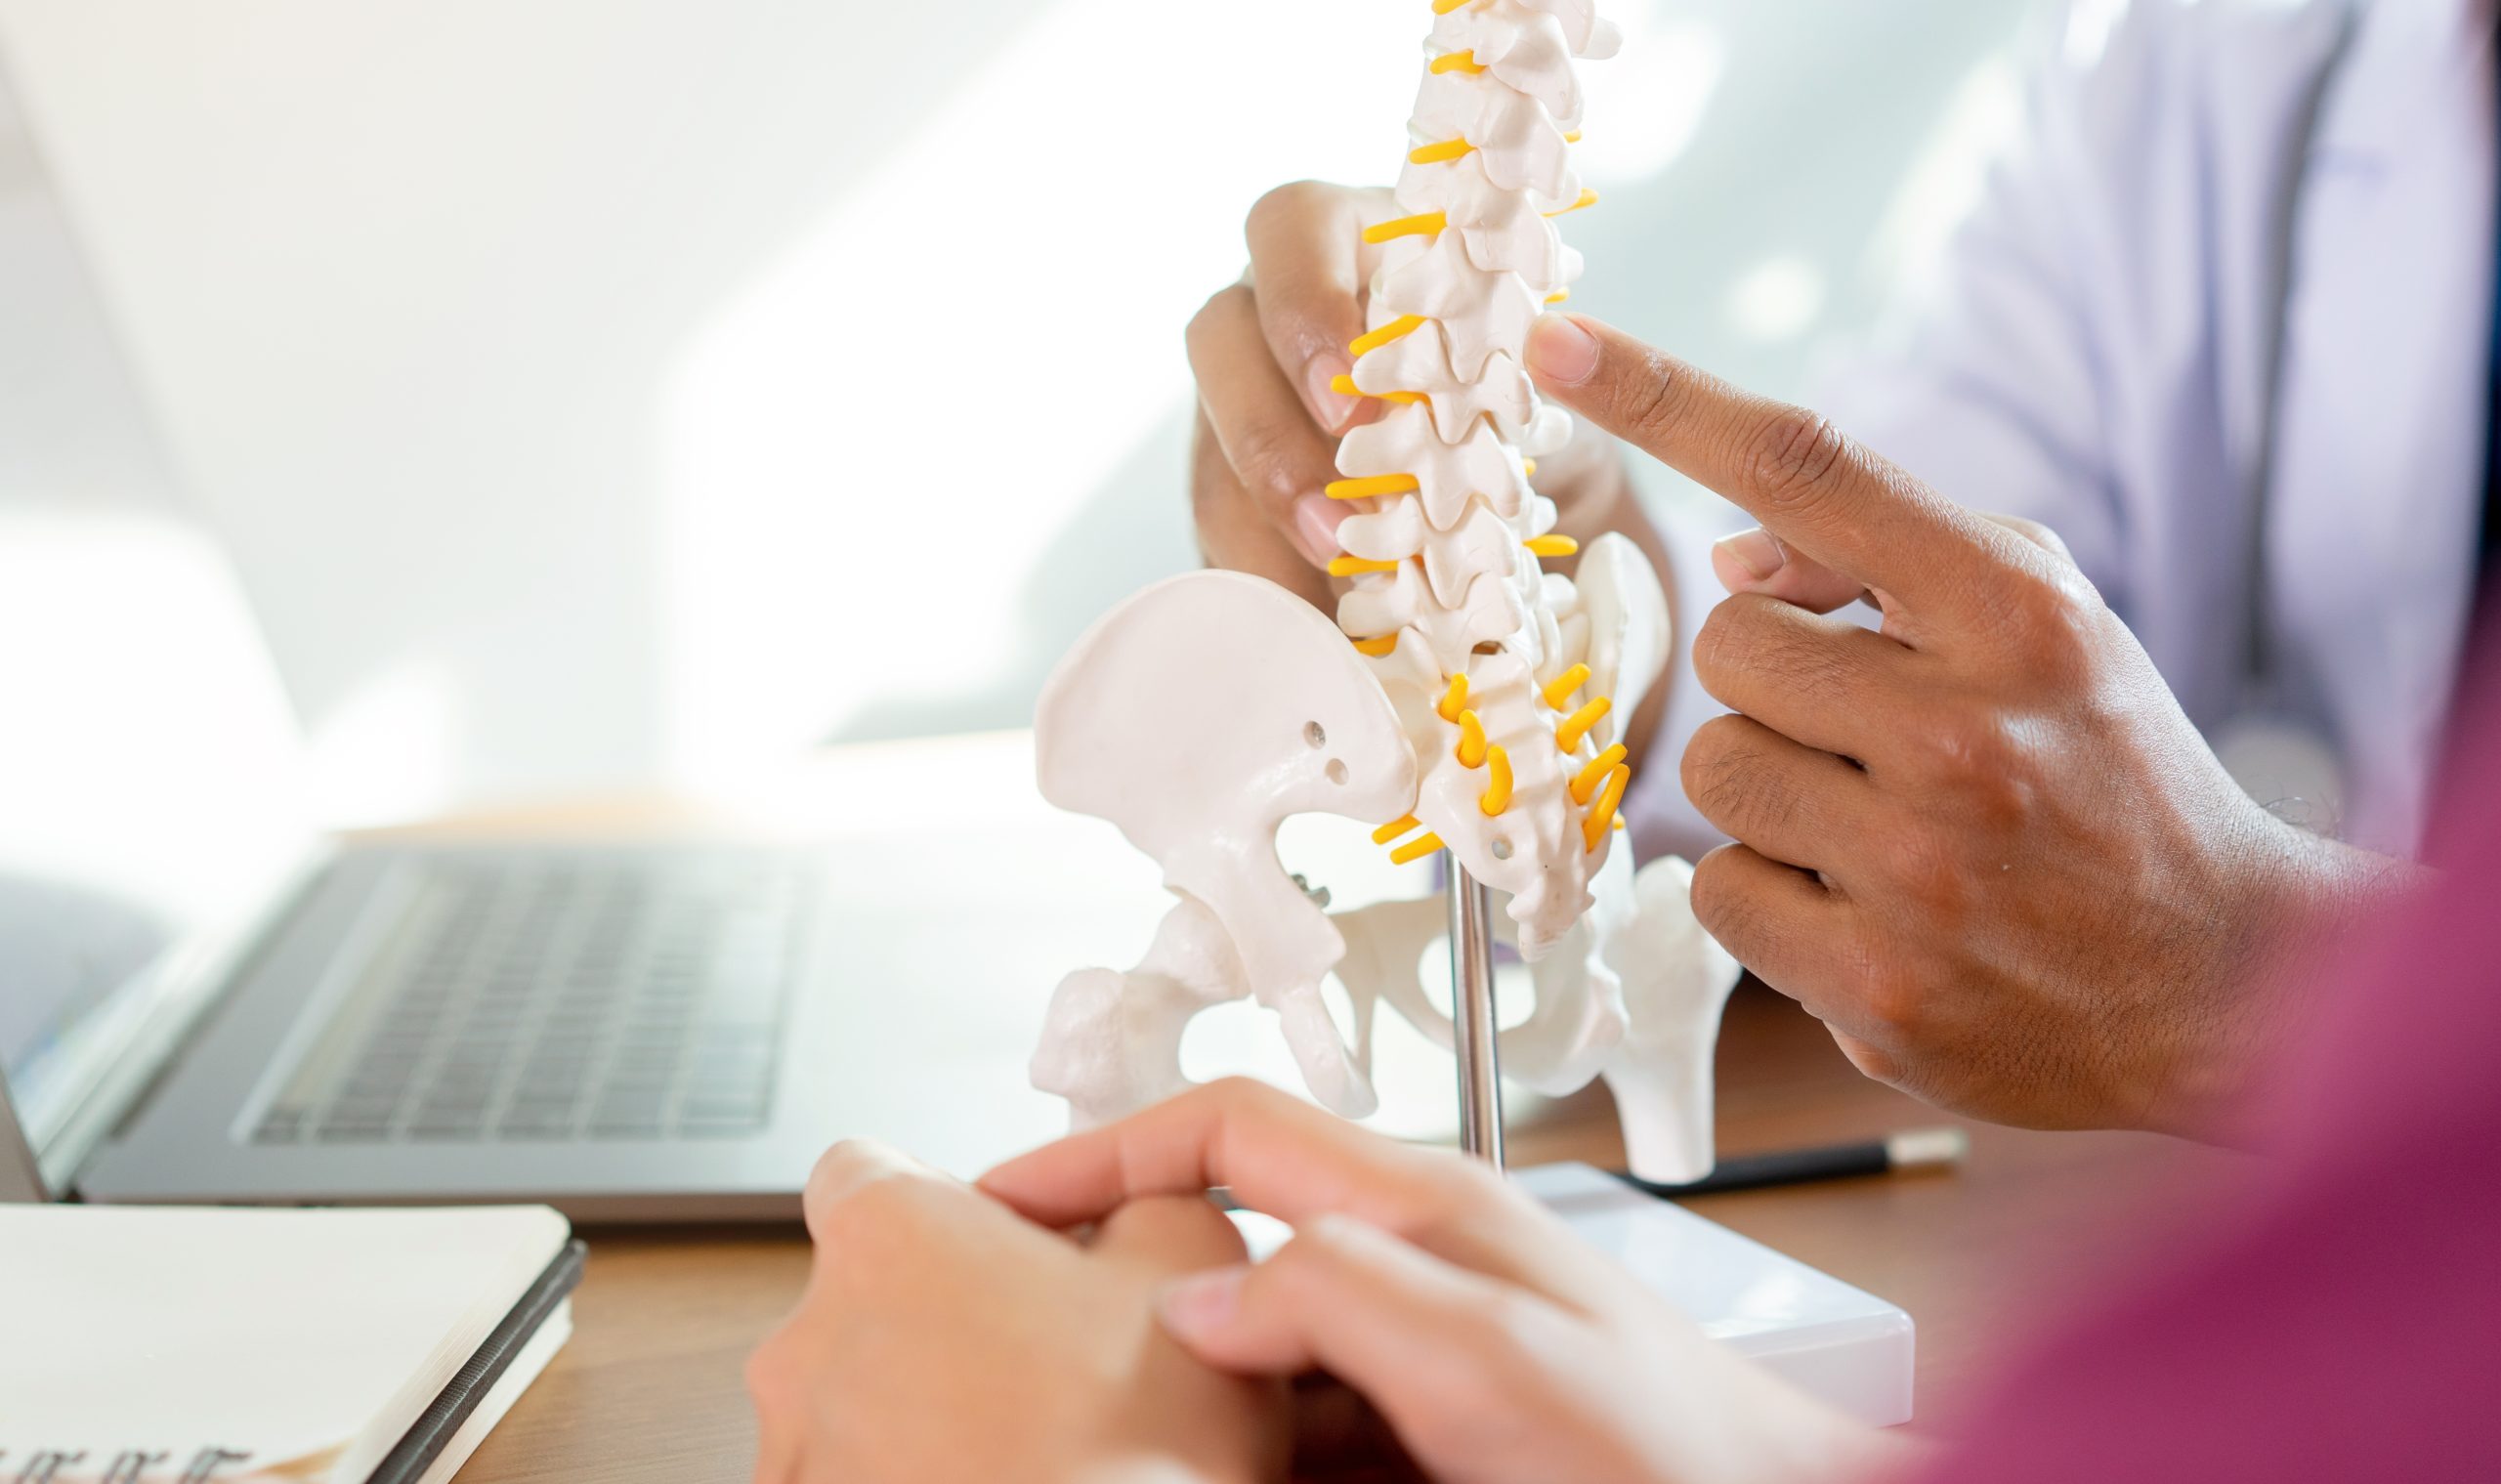 Chiropractic Care For Upper Cervical Pain Near Snohomish County, WA